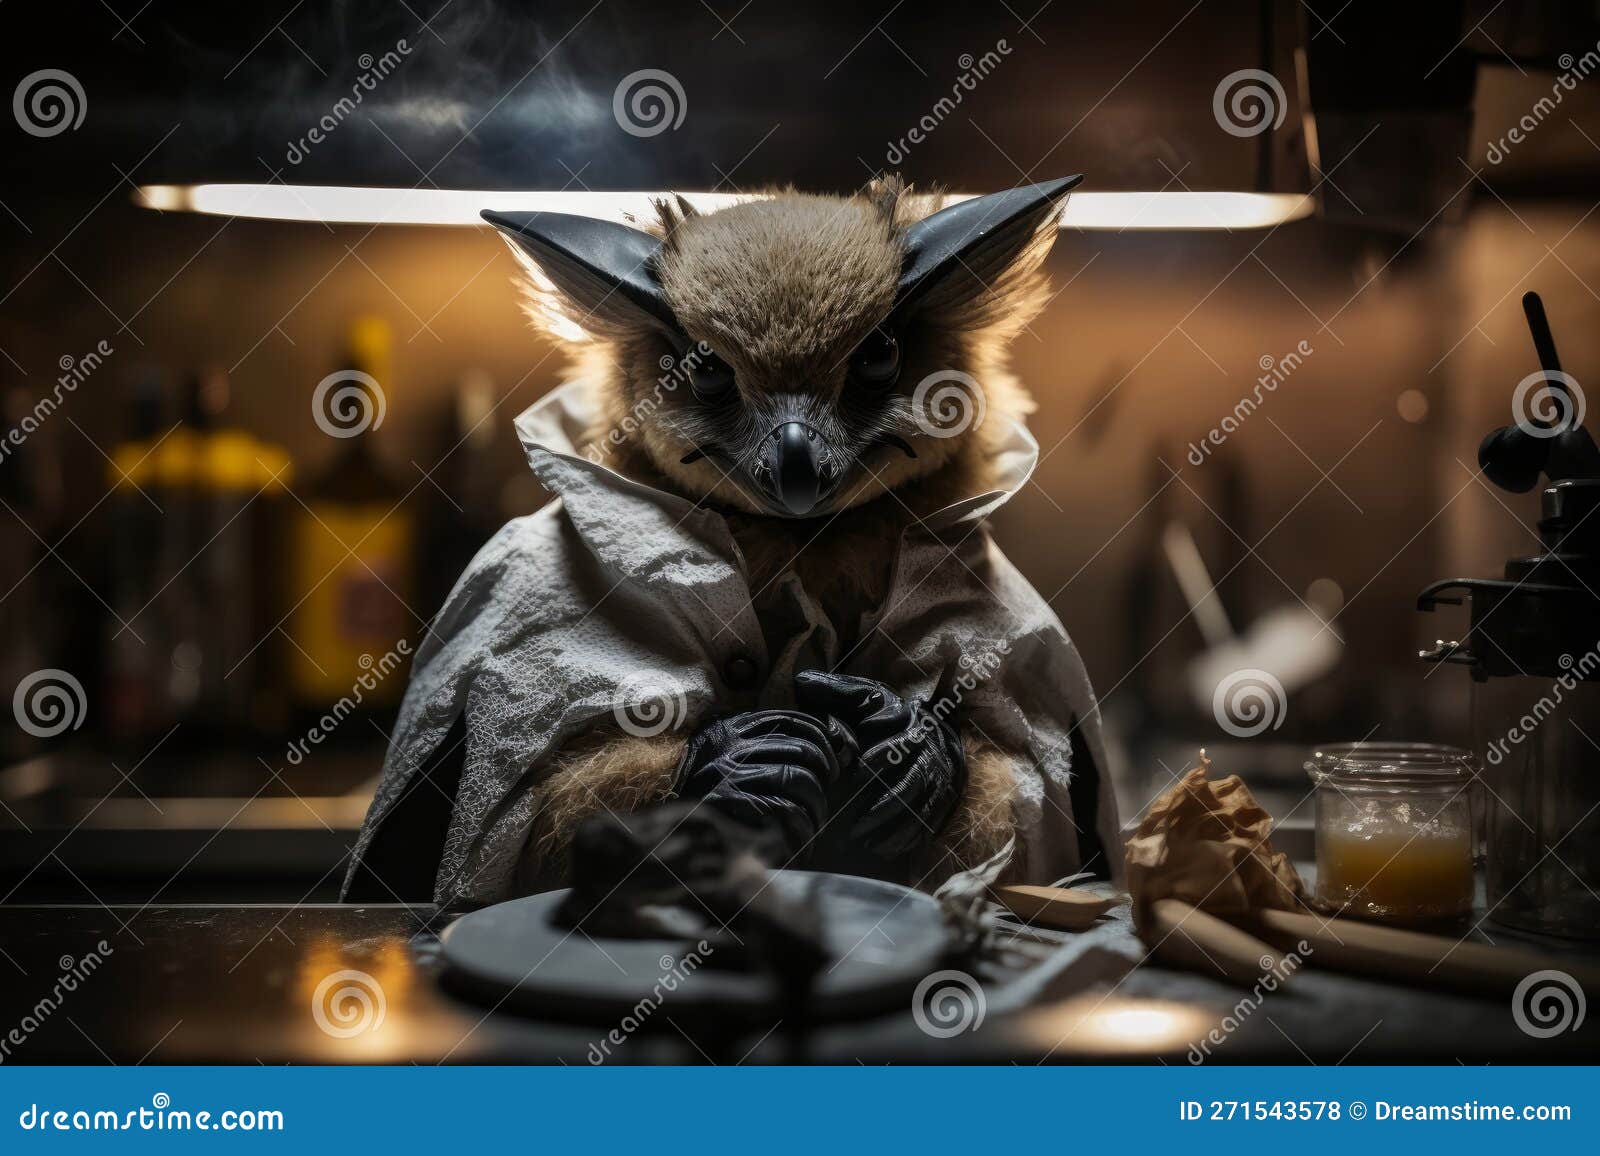 cute bat chef spooky kitchen delights awardwinning pet photography with canon eos 5d mark iv dslr